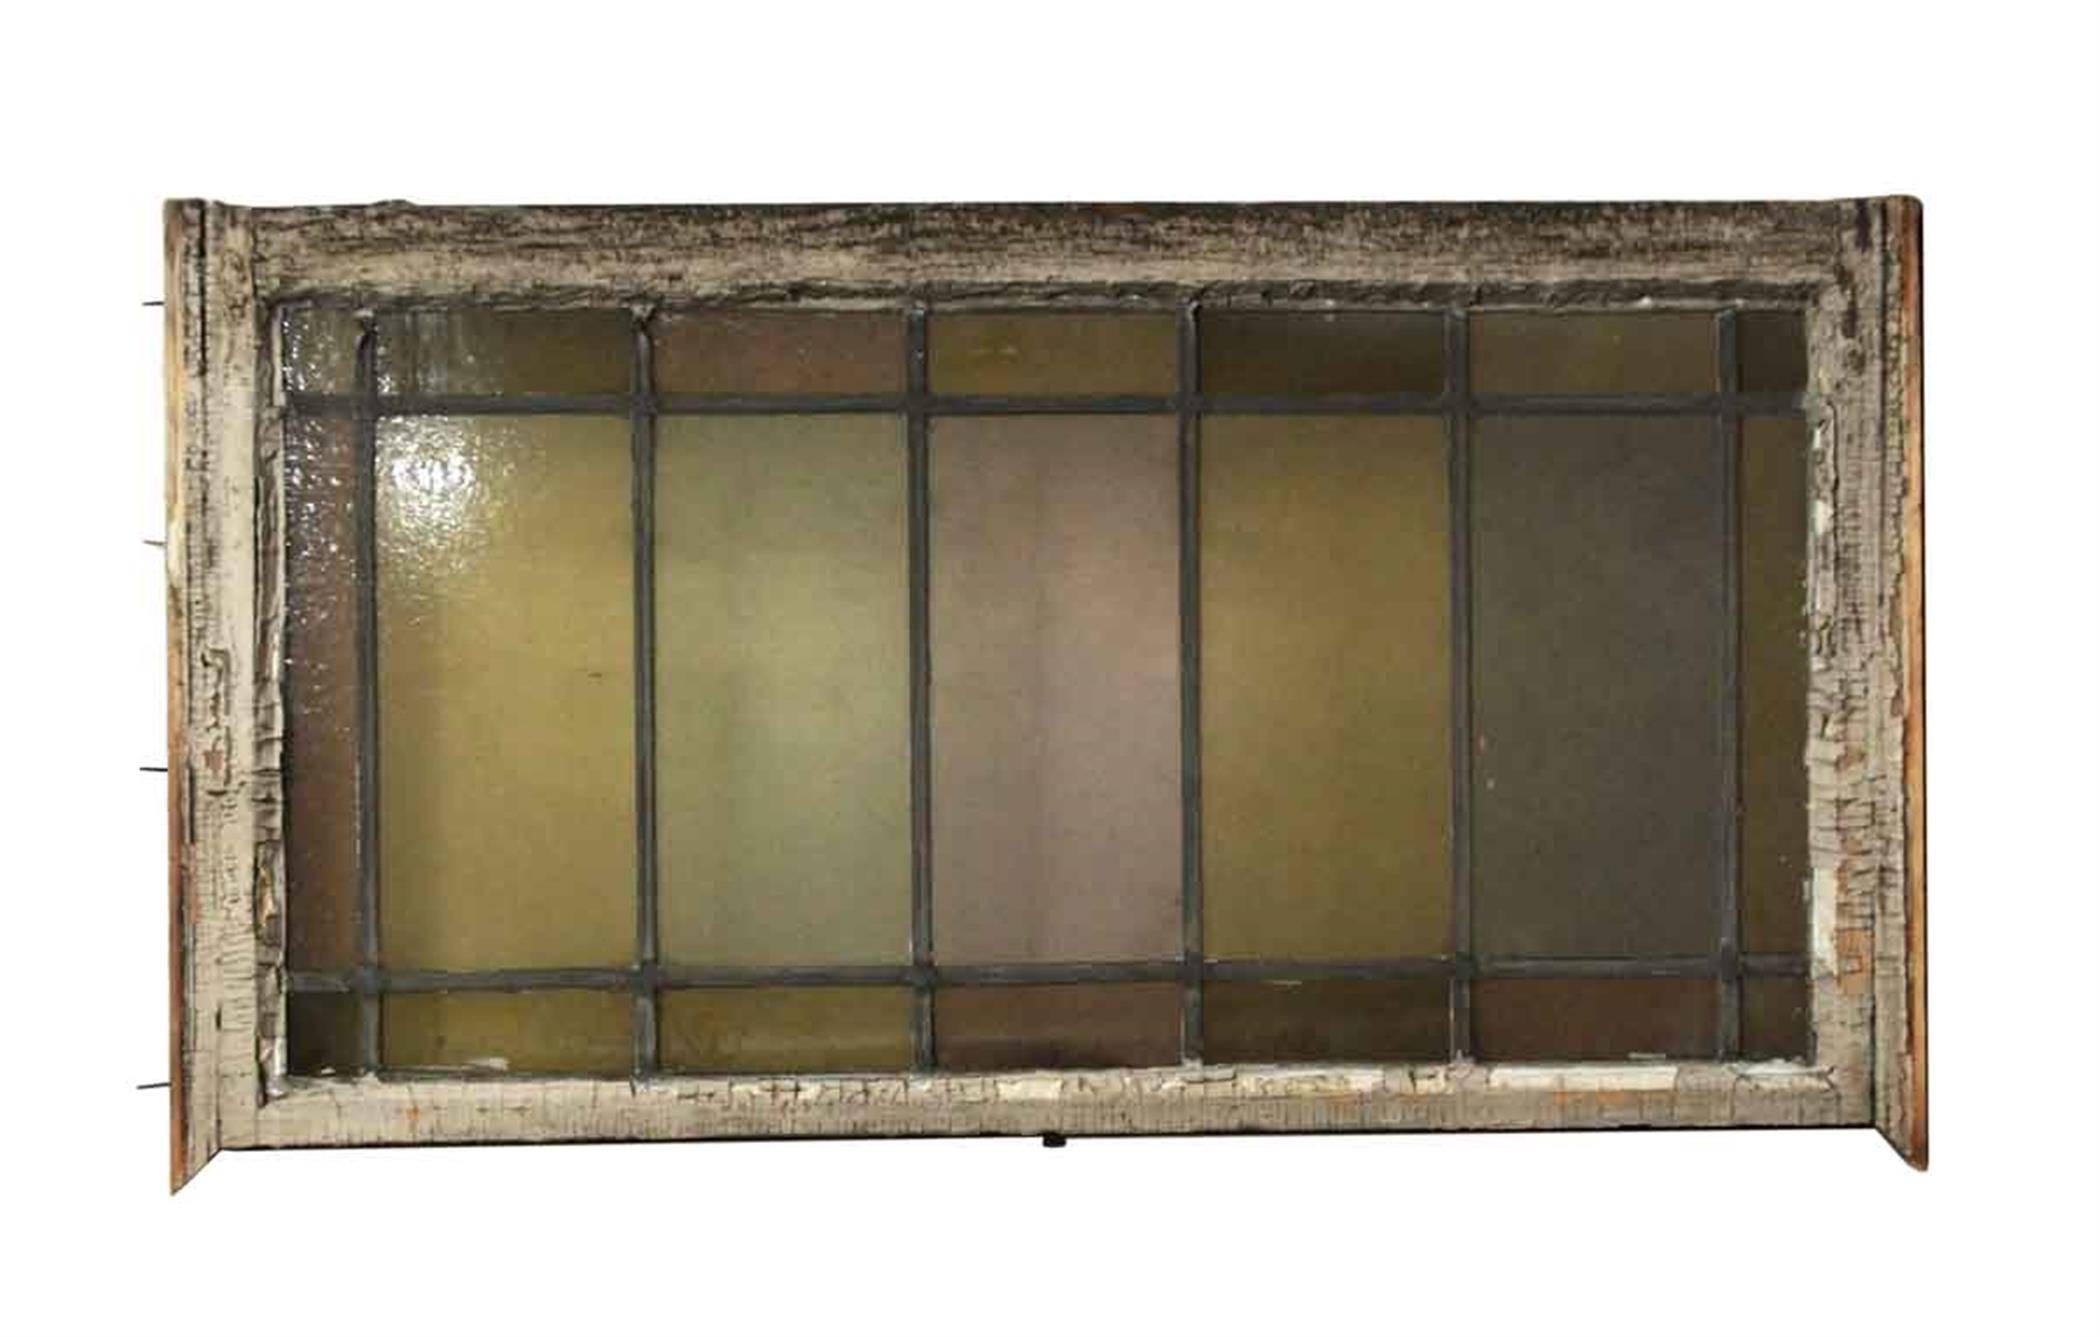 1910 reclaimed stained glass window with pastel colored glass. Shows wear. Priced each. Eight available at time of posting. Small quantity available at time of posting. Please inquire. Priced each. This can be seen at our 400 Gilligan St location in